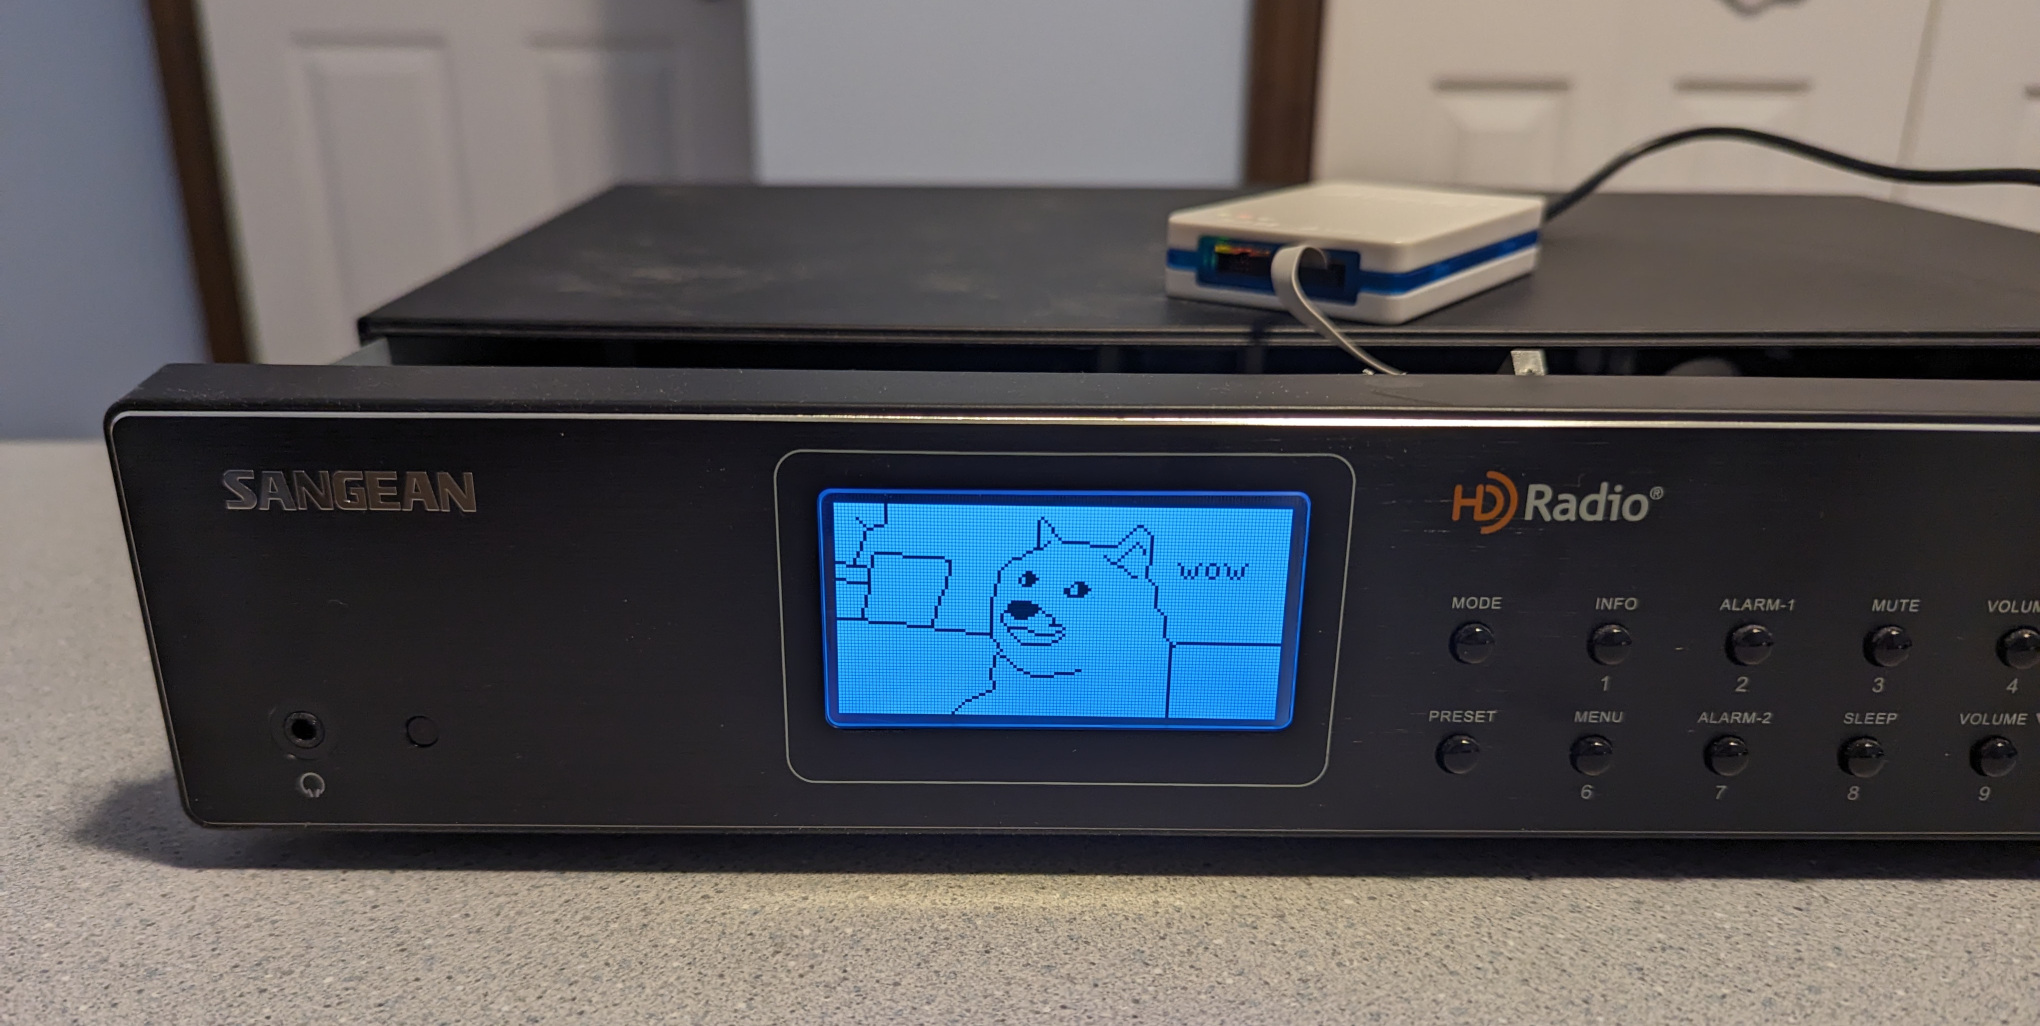 Sangean HDT-20 bootup screen replaced with a Doge meme